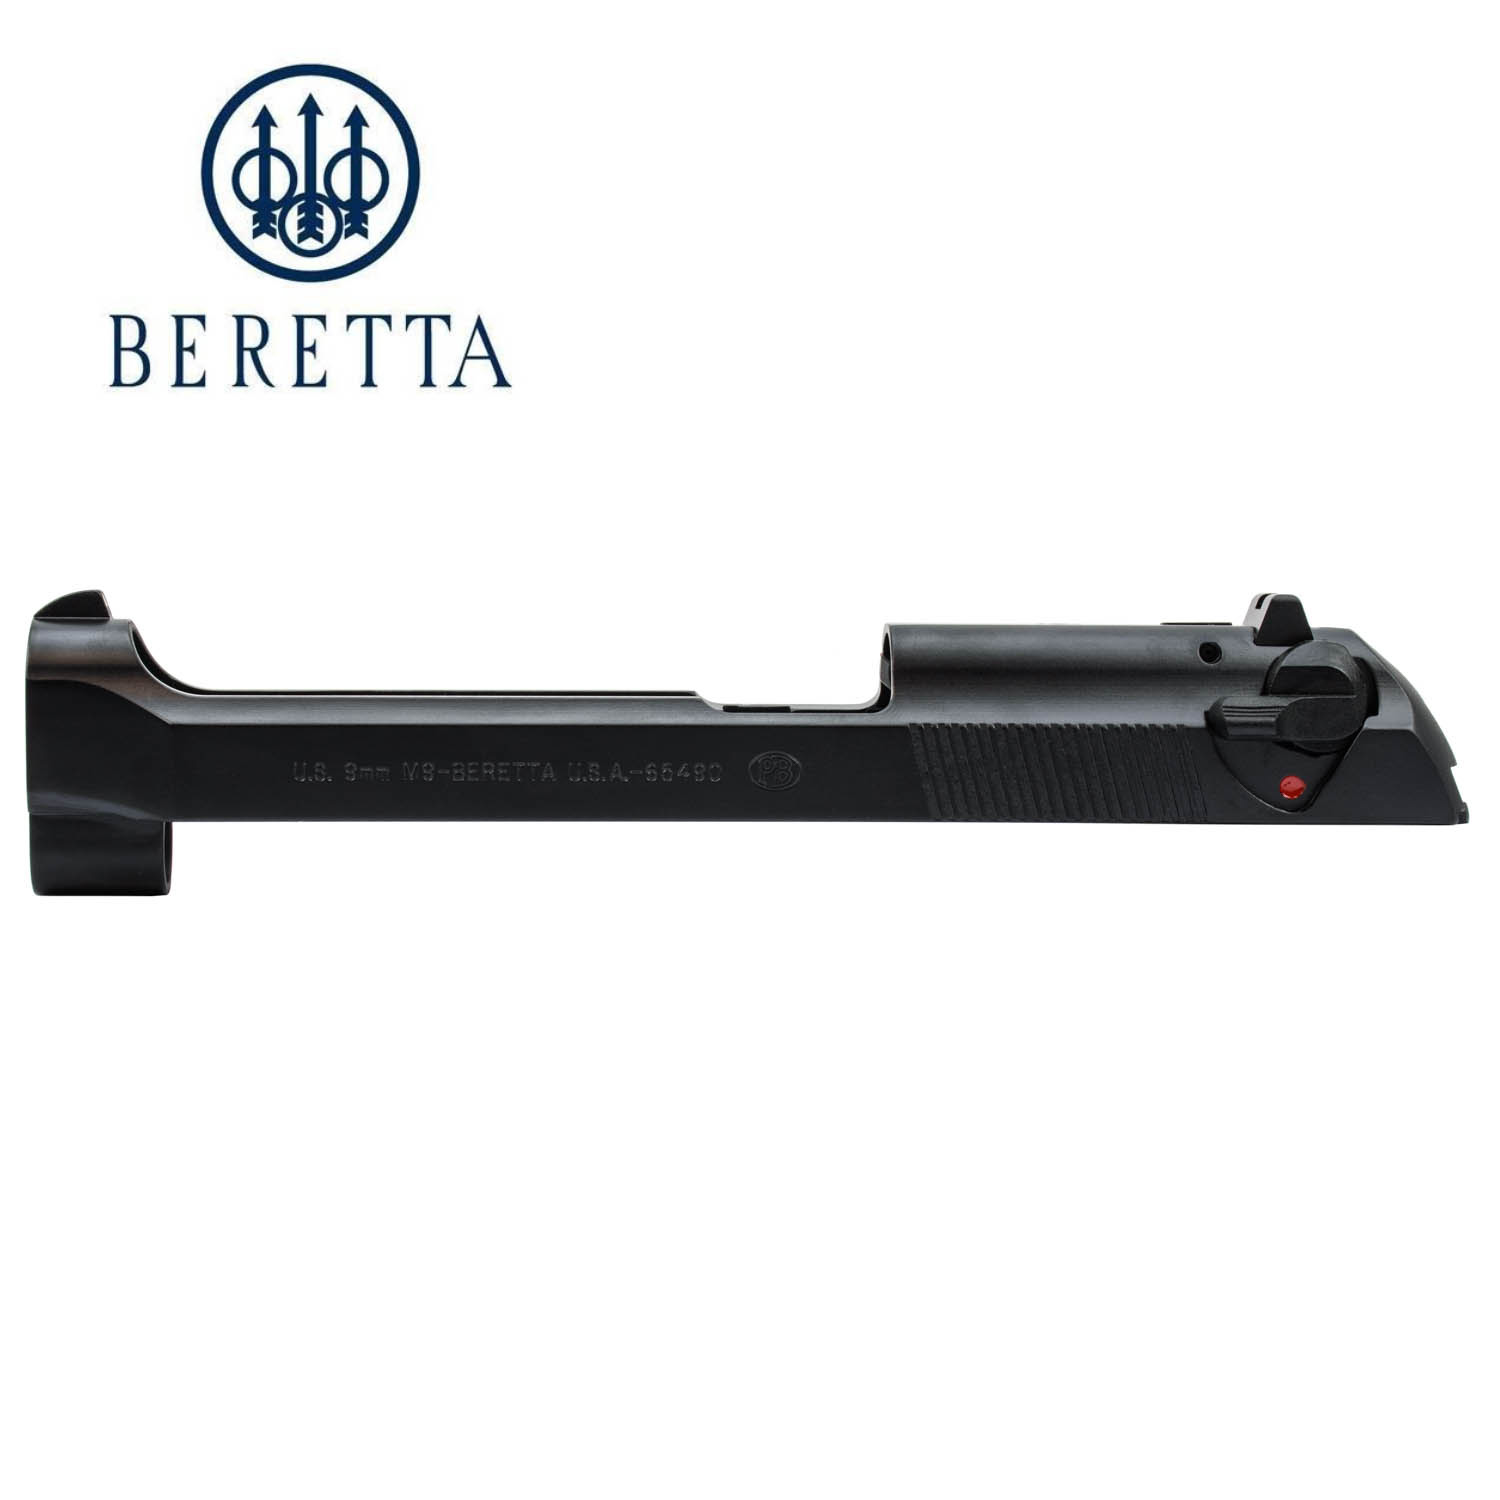 Buy Beretta M9 Slide Assembly, Commercial Factory replacement gun parts